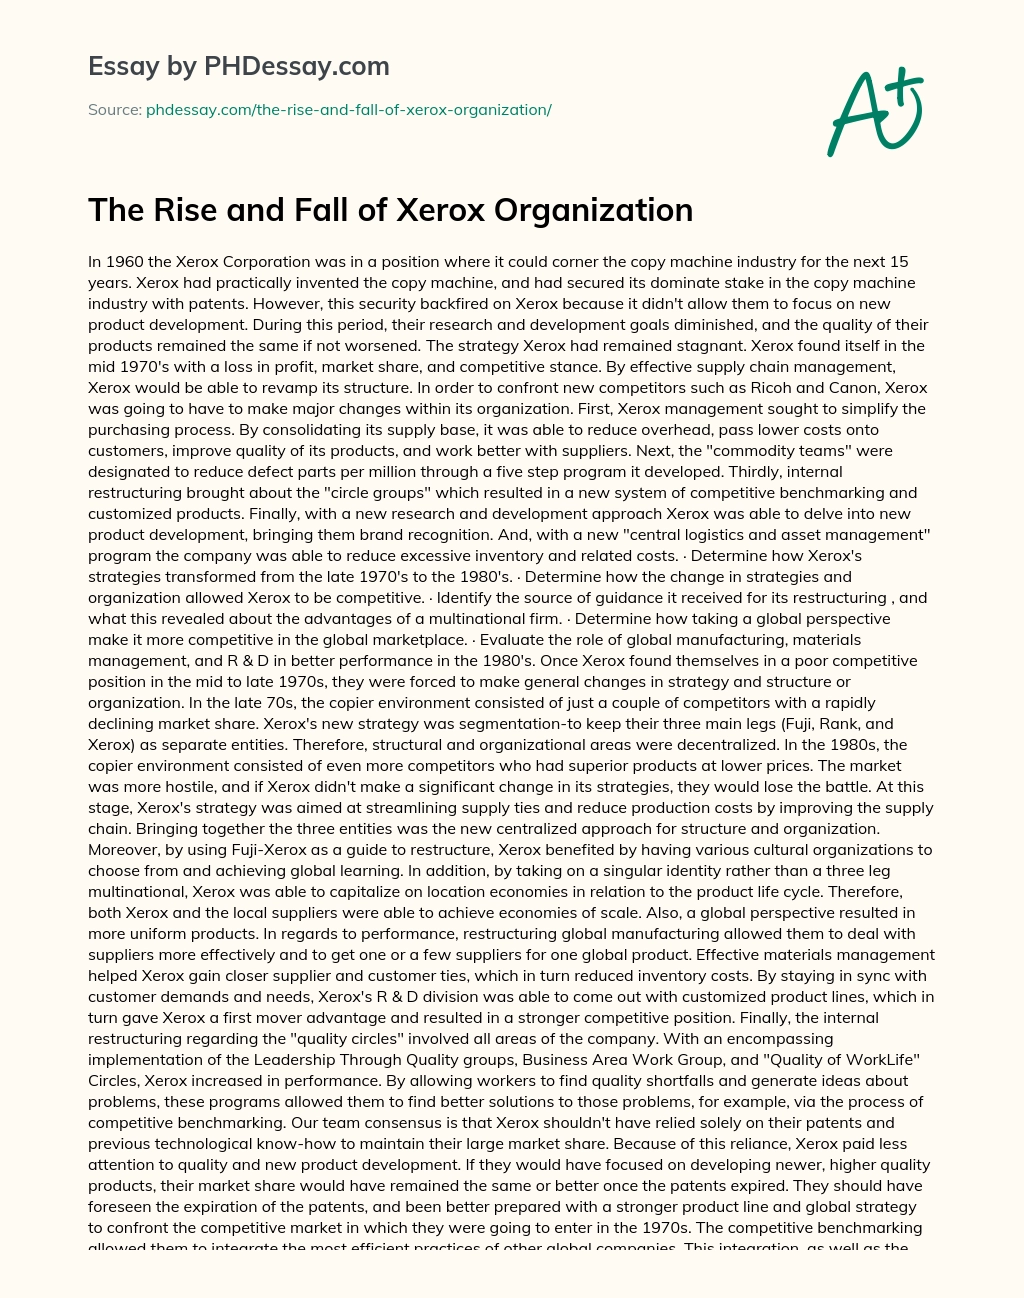 The Rise and Fall of Xerox Organization essay